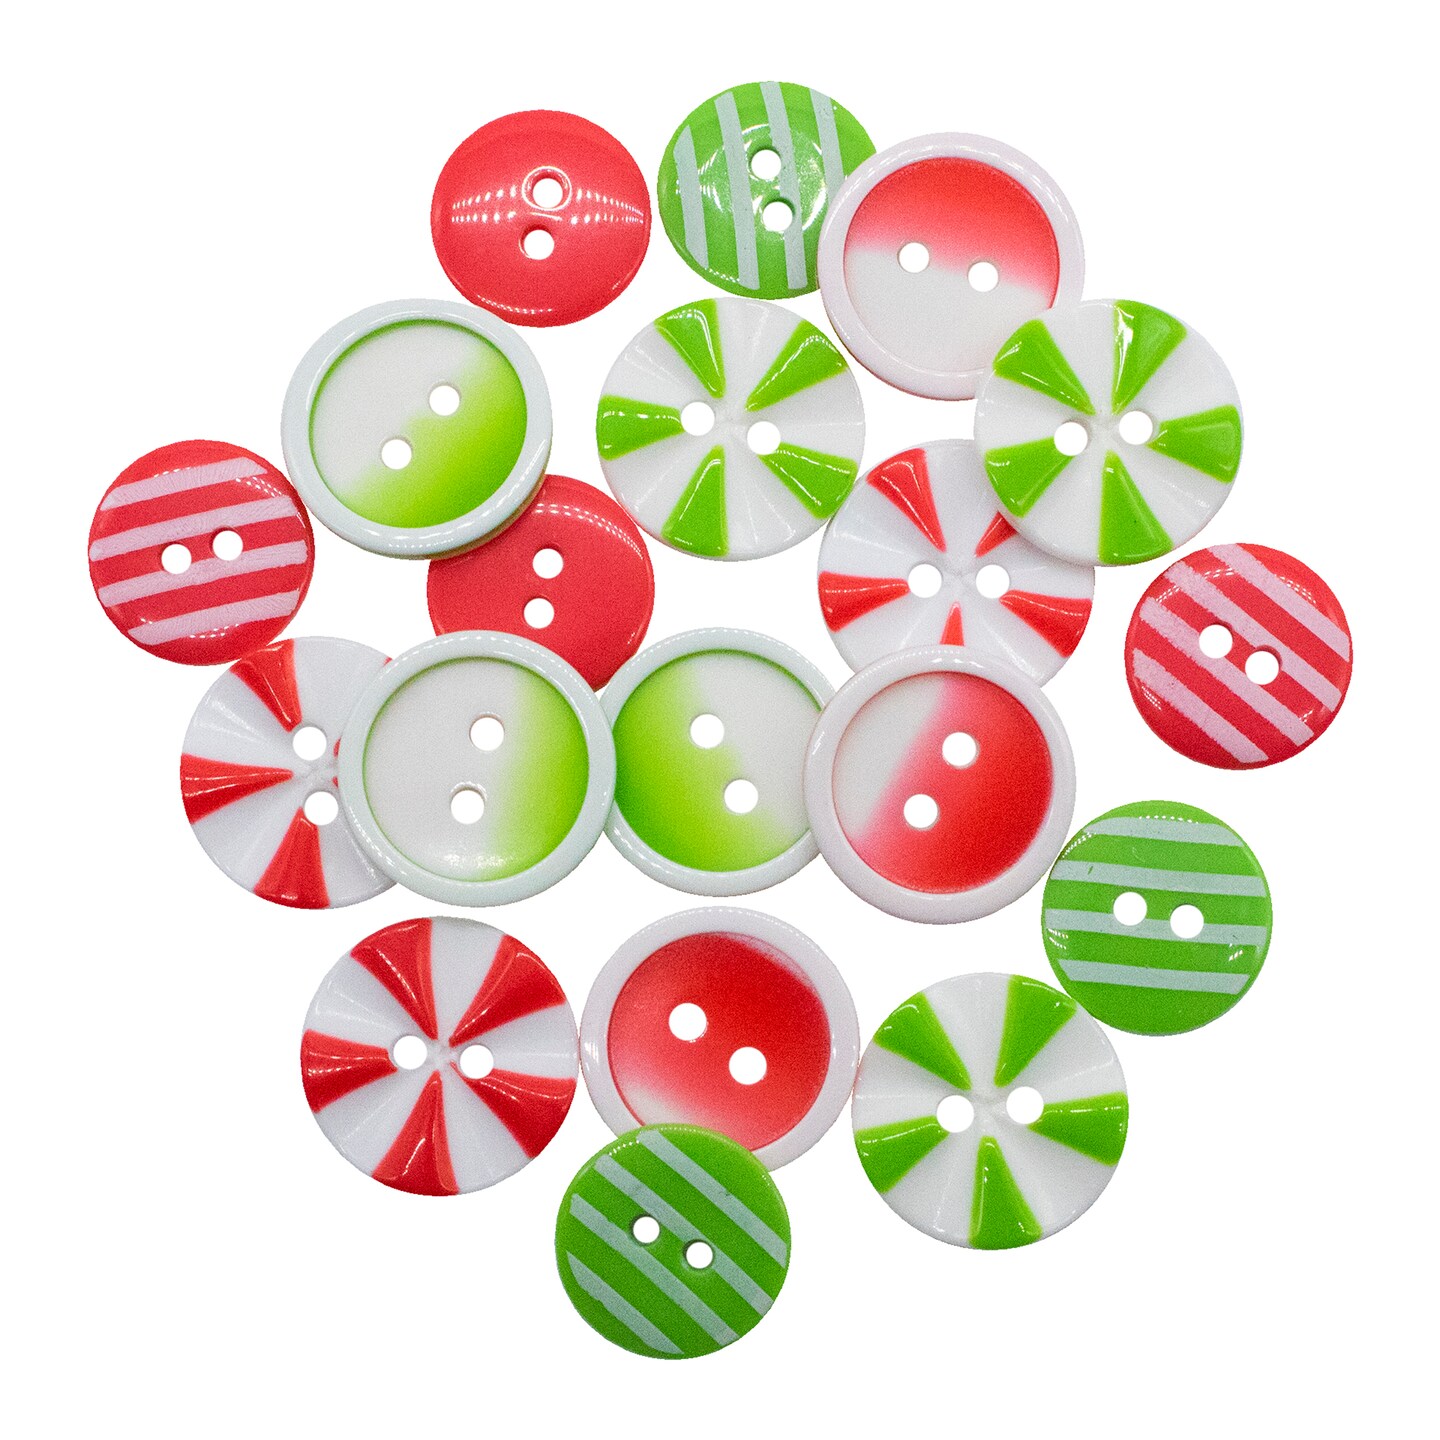 Buttons Galore Colors of Christmas Buttons for Sewing Crafts Scrapbooks DIY Projects - 3 Packs of Buttons 48 Buttons&#x2026;